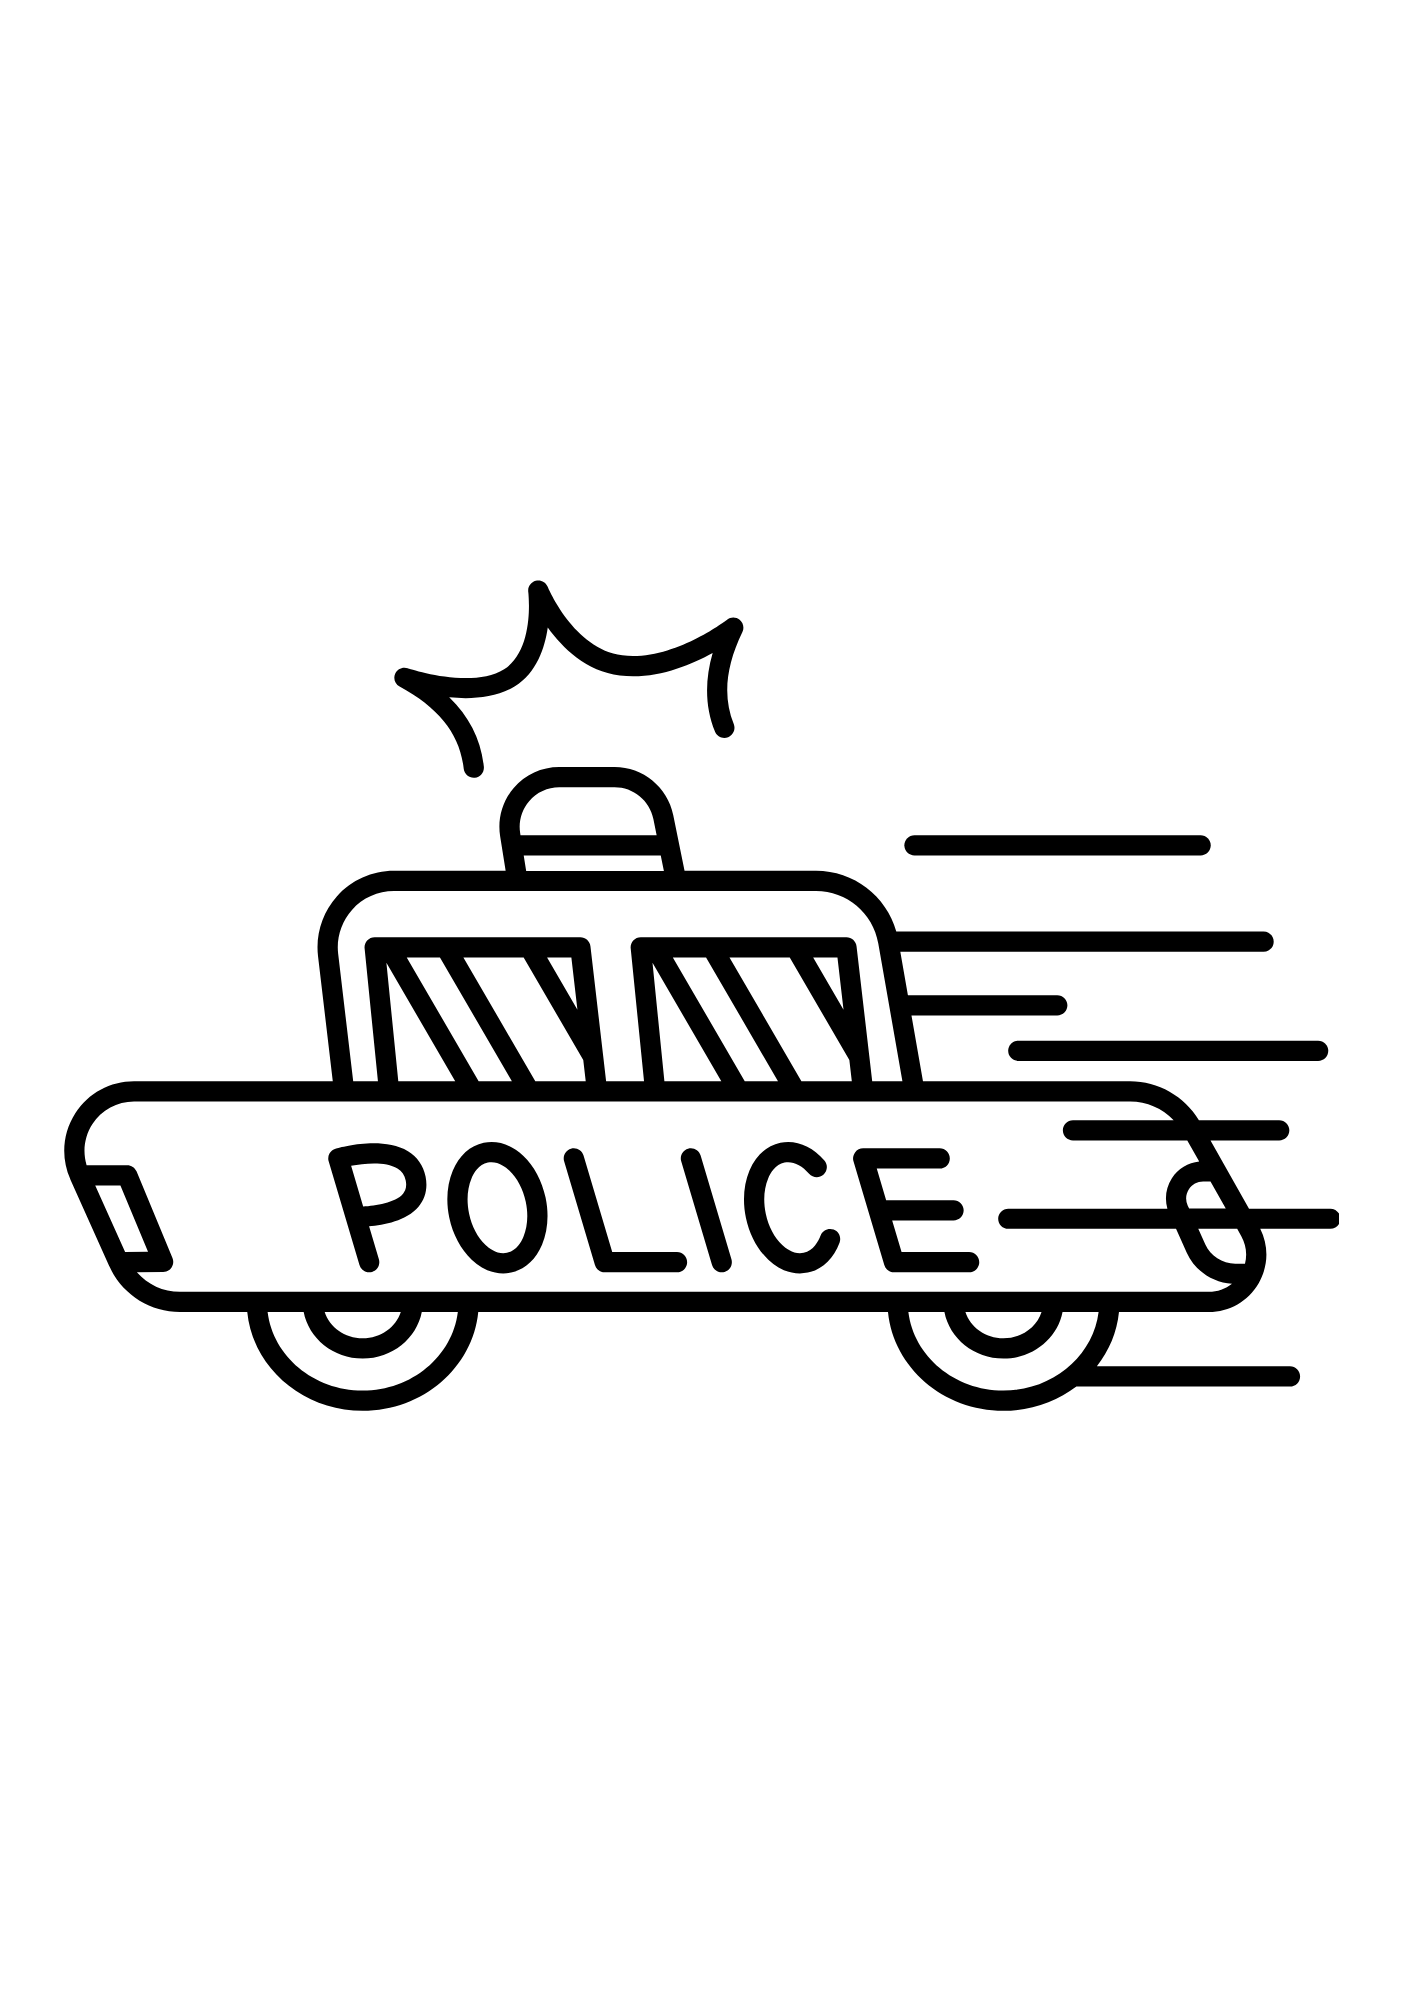 Police Car Printable For Children Coloring Pages